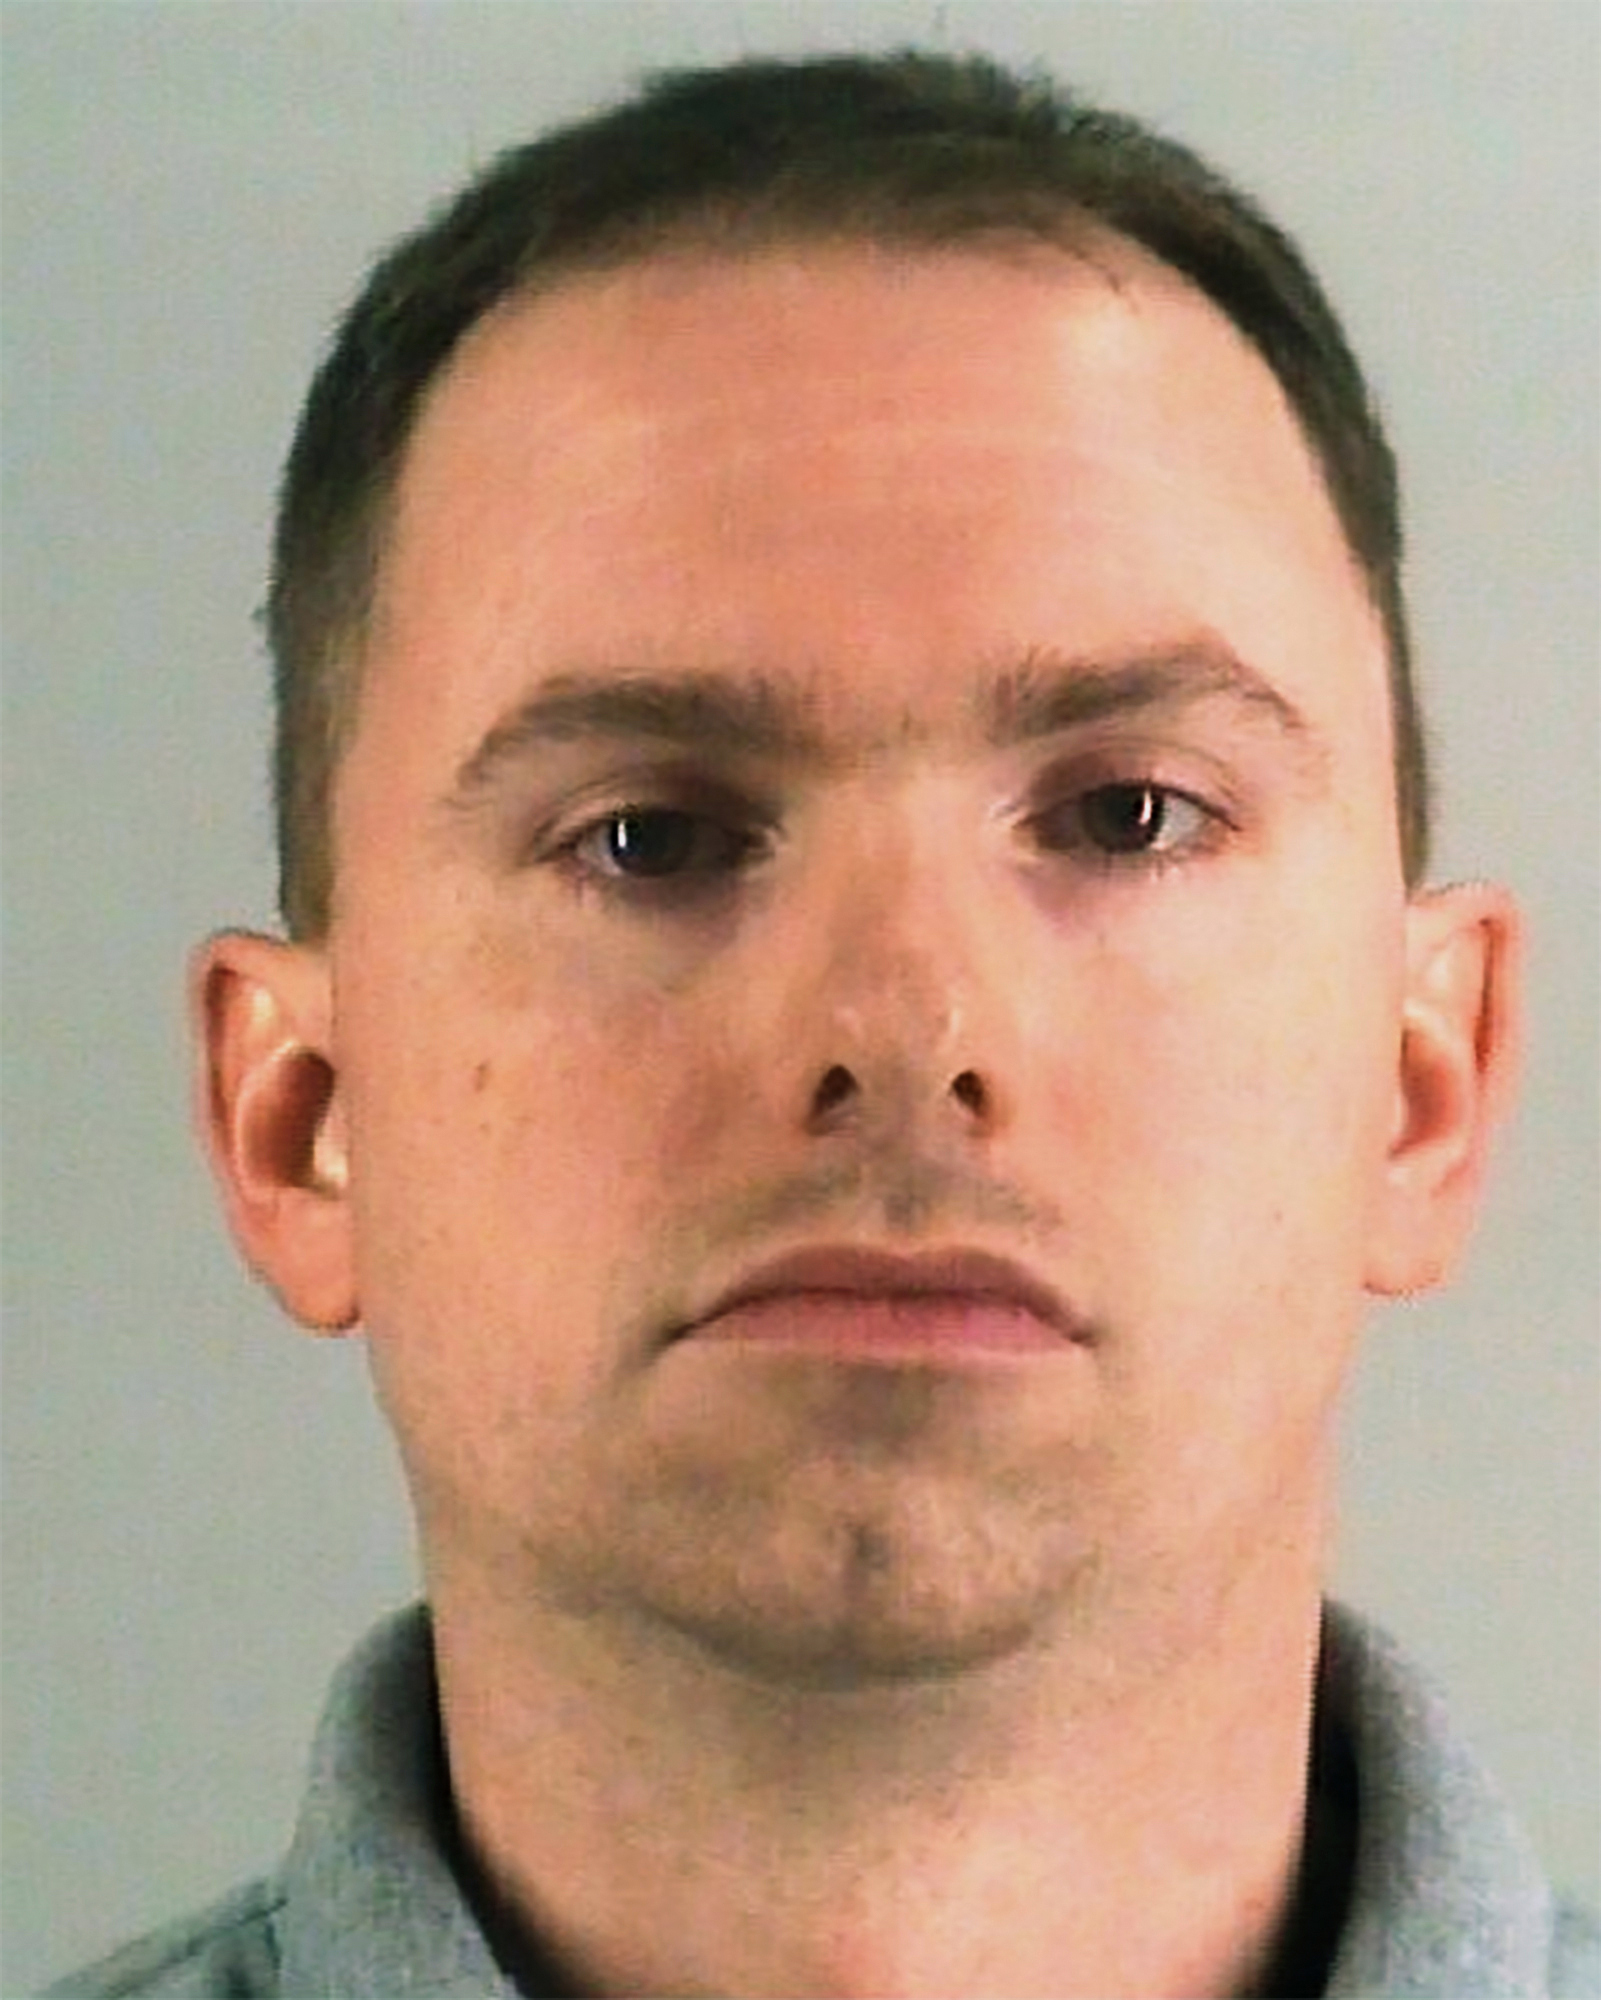 This undated file photo provided by the Tarrant County Jail shows Aaron Dean, a Fort Worth police officer who shot and killed a black woman through a back window of her home while responding to a call about an open front door. A judge has issued a gag order in Dean's murder trial that prohibits lawyers and others involved in Dean's trial from speaking publicly about specifics of the case.